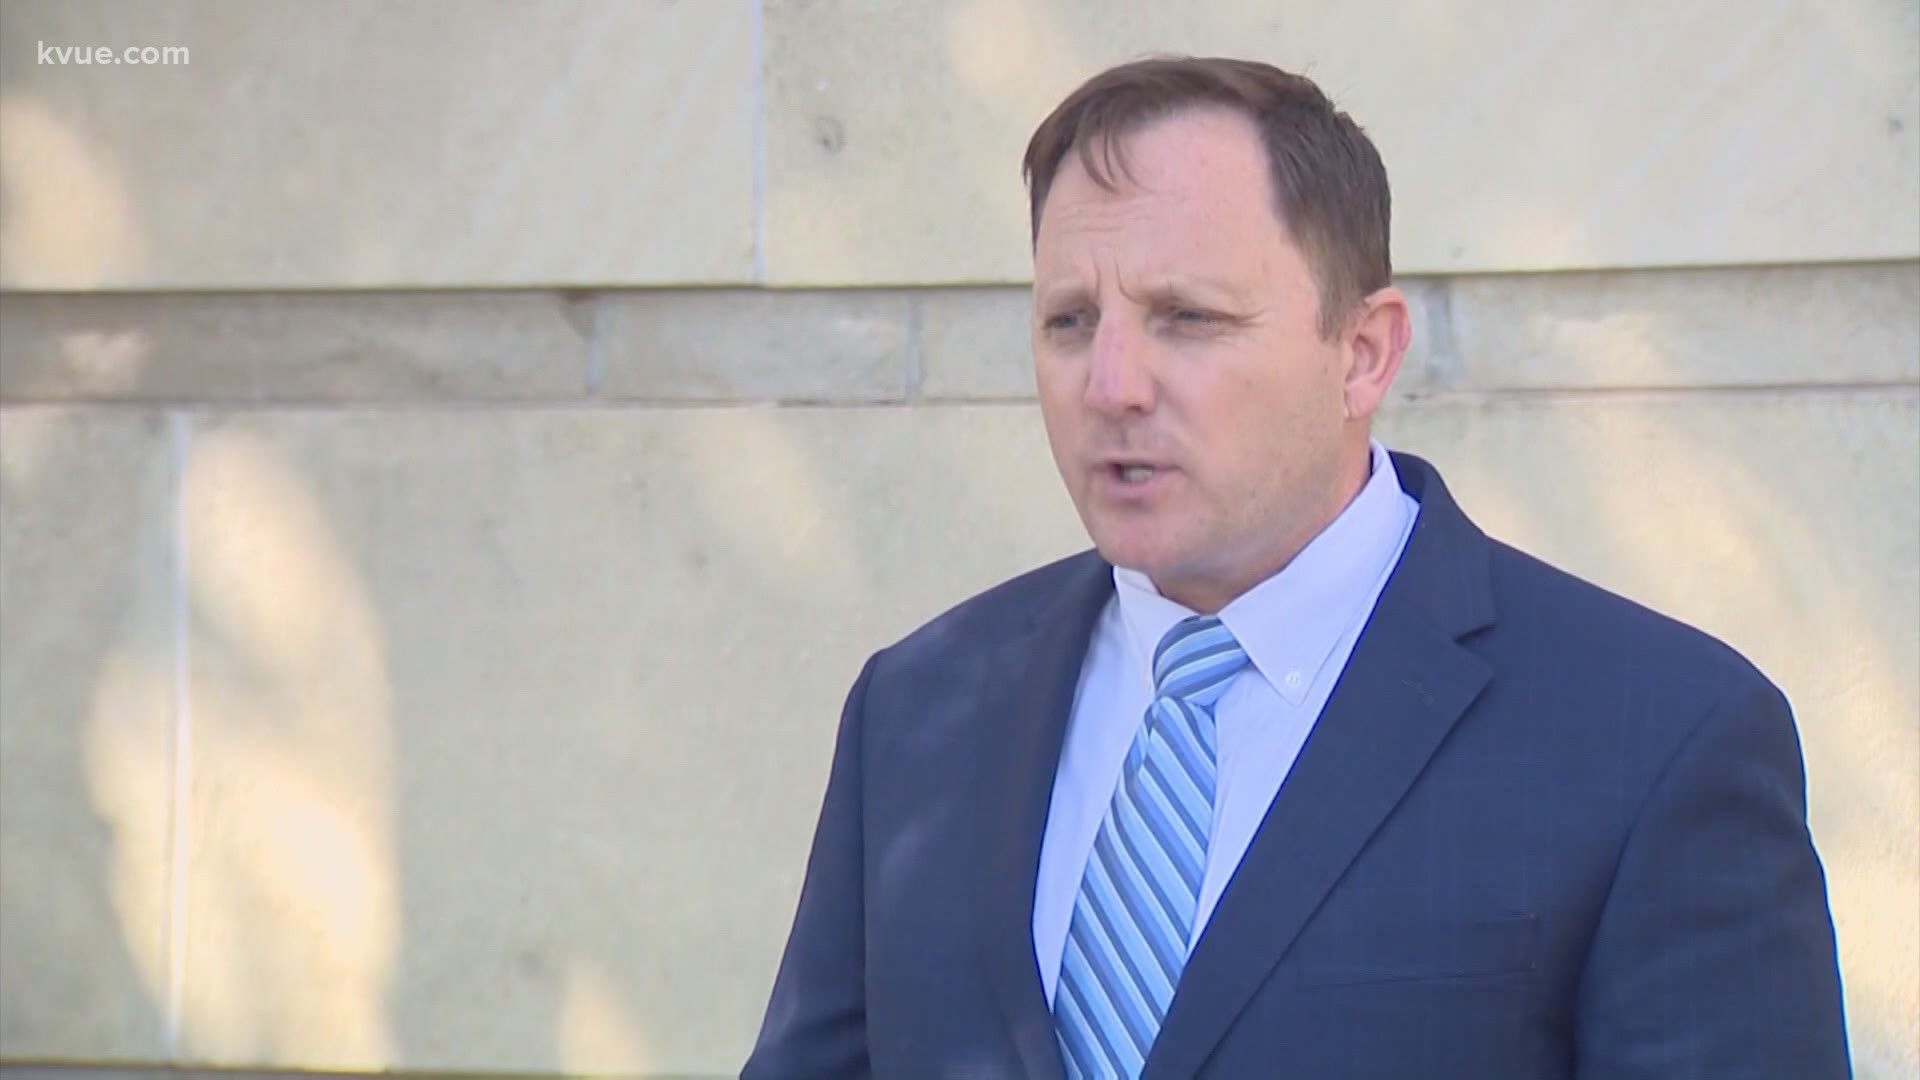 Williamson County Sheriff Robert Chody held a press conference to respond to the indictment shortly after posting bail. He is denying any wrongdoing.